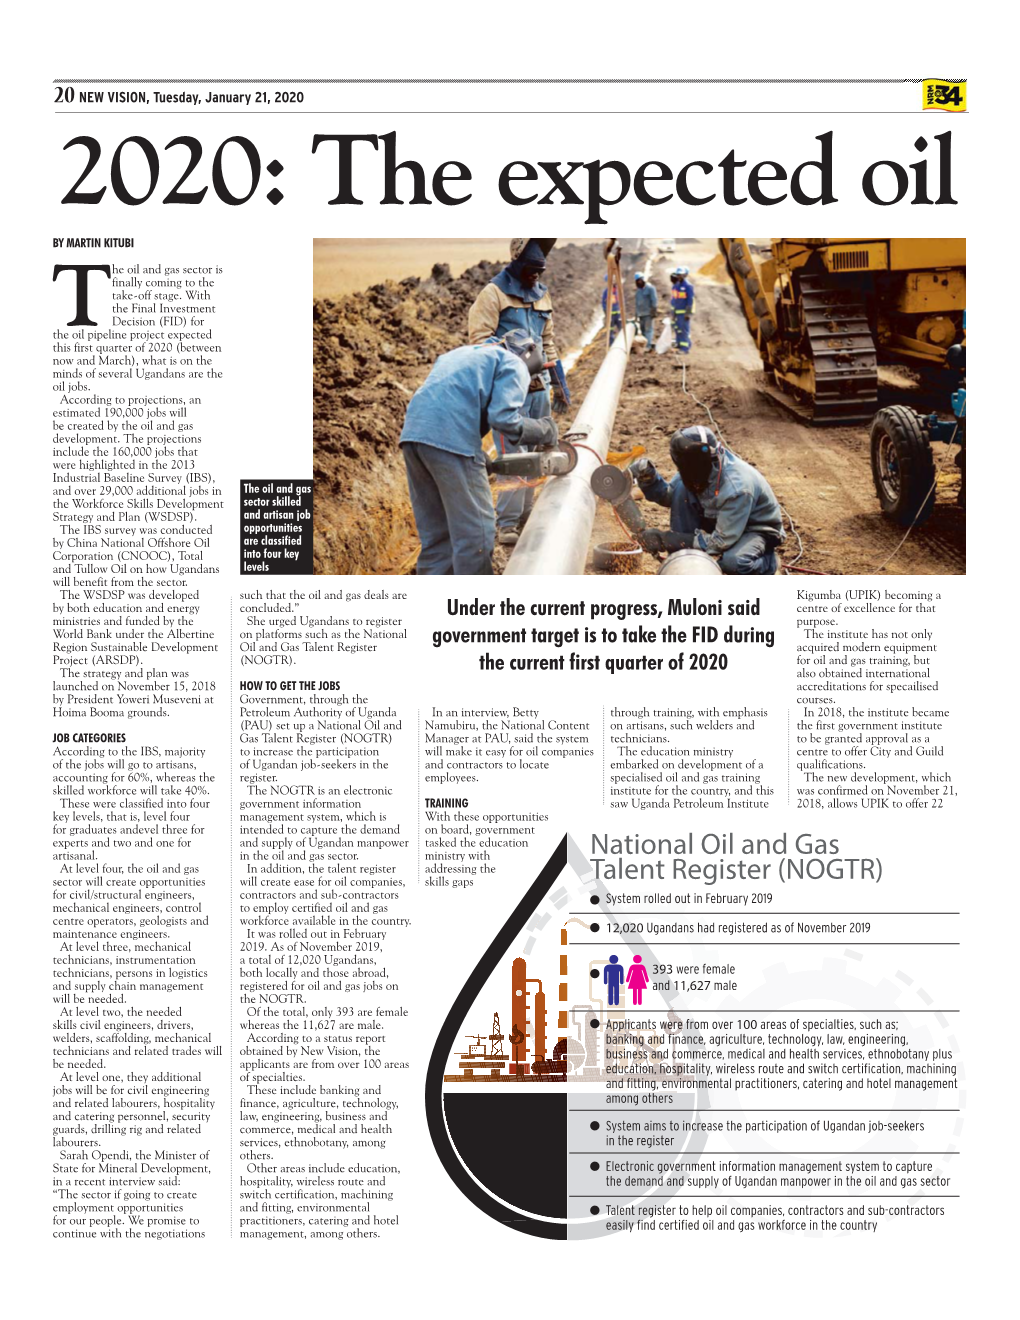 2020: the Expected Oil by MARTIN KITUBI